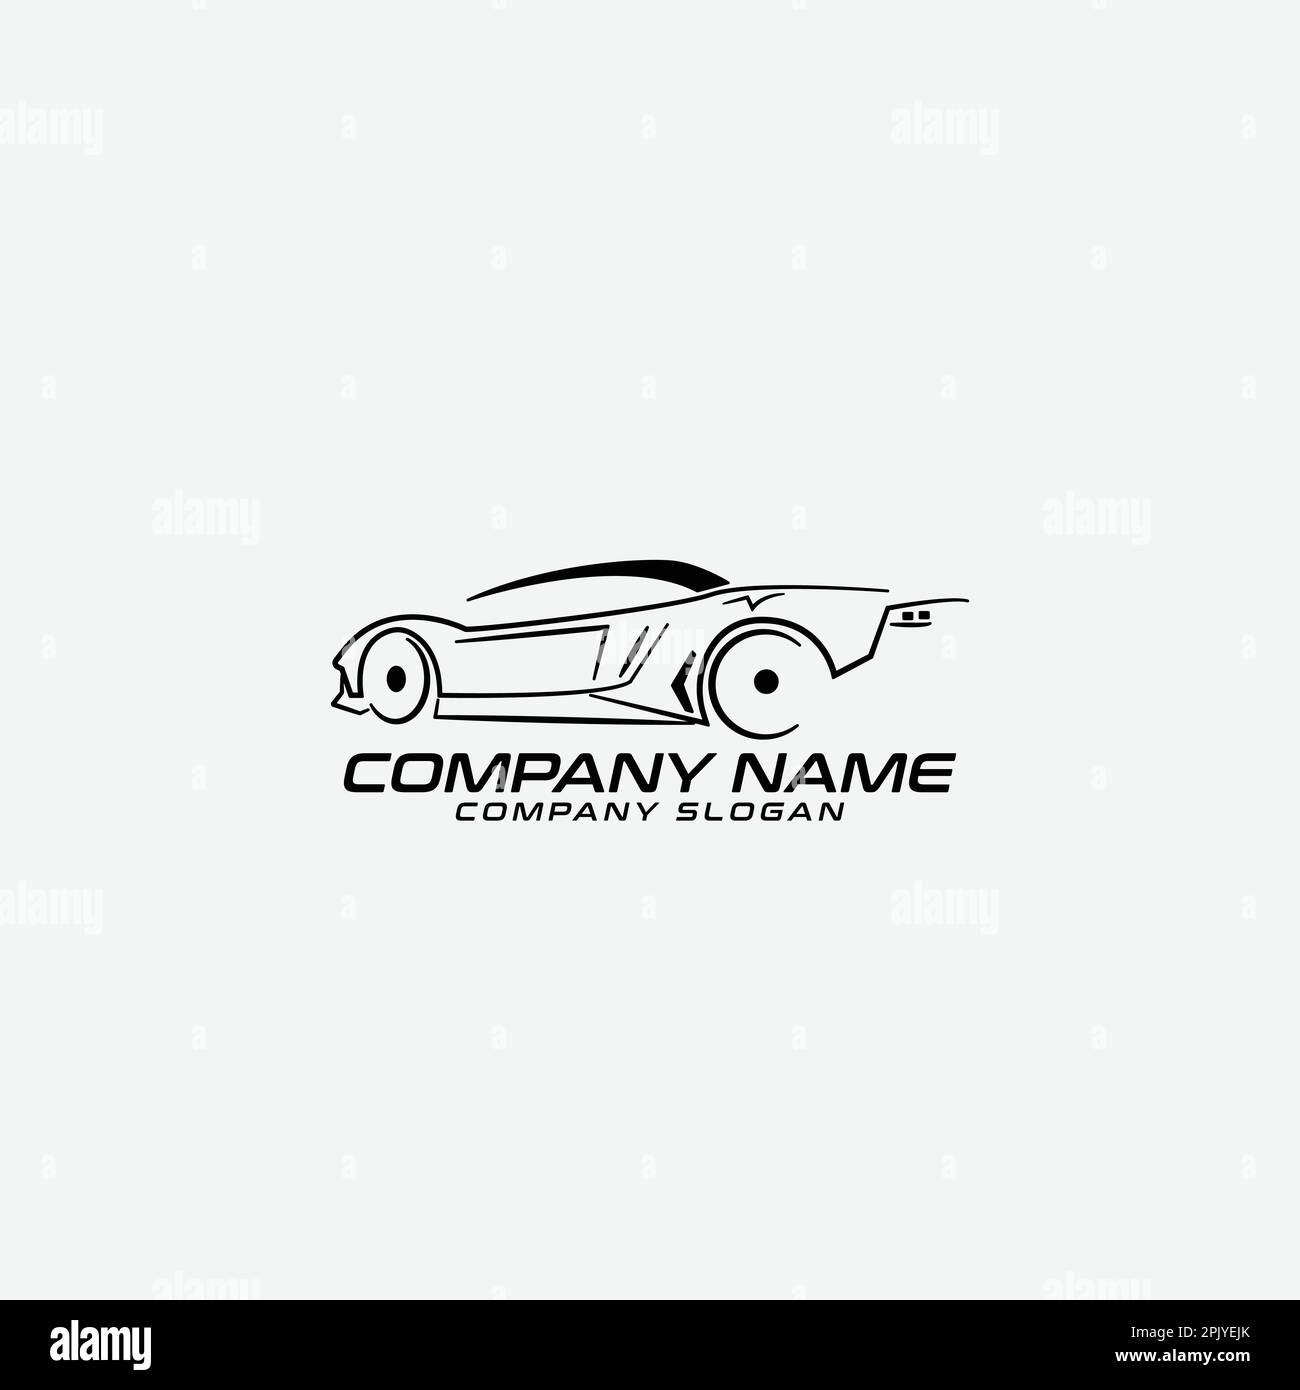 how to draw cars: Drawing Step by Step For Beginners! Drawing 3D Super Cars  like Bugatti, Lamborghini, McLaren, Dodge, Ford & Chevrolet (Draw With